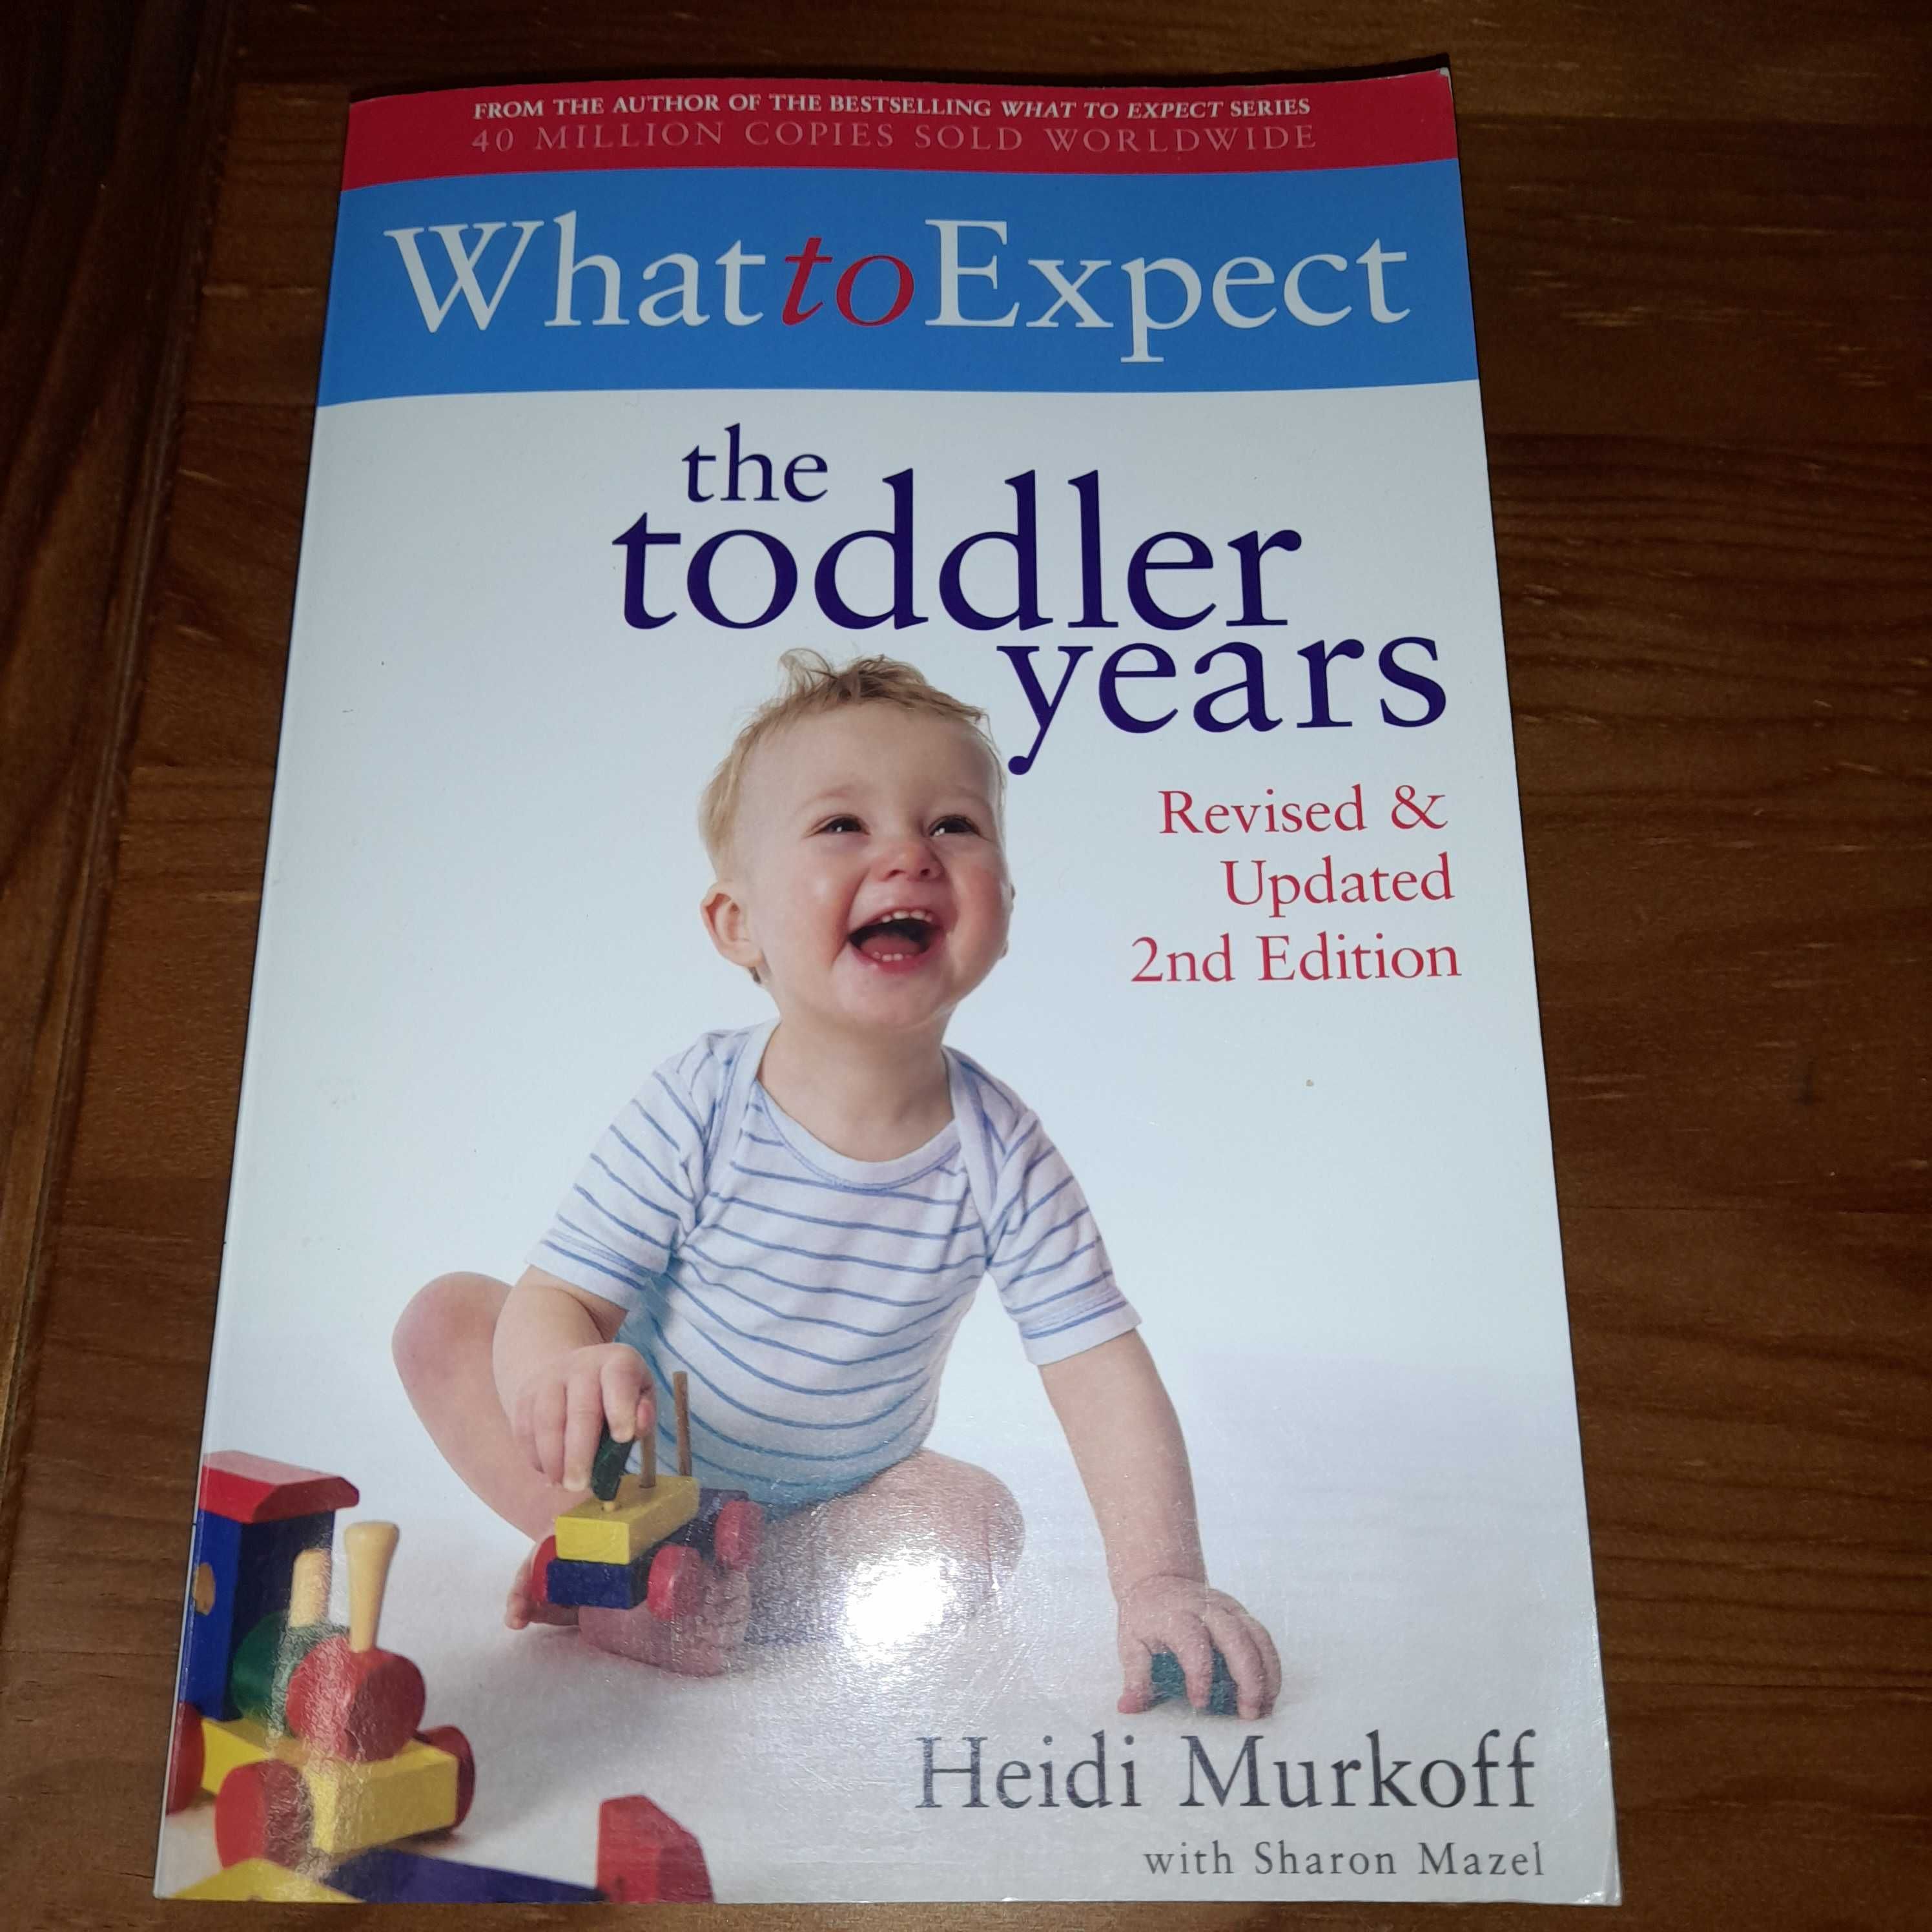 What to Expect the toddler years - inclui portes